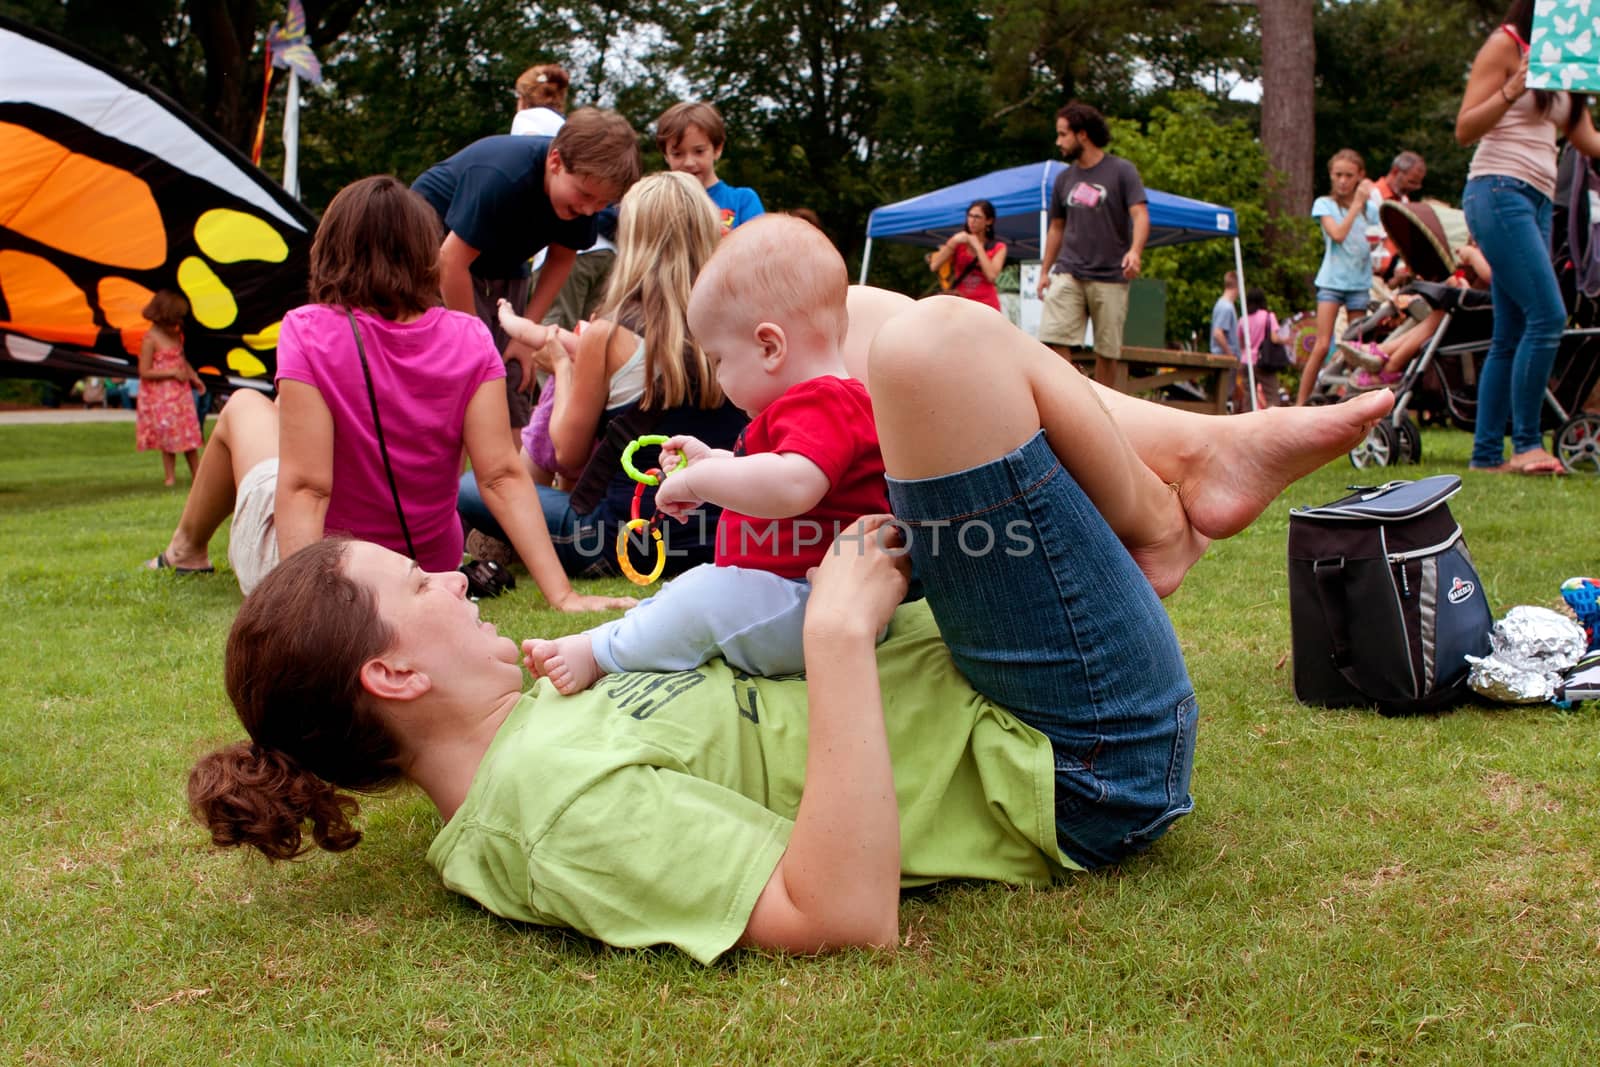 Mother Plays With Baby While Laying On Grass At Festival by BluIz60